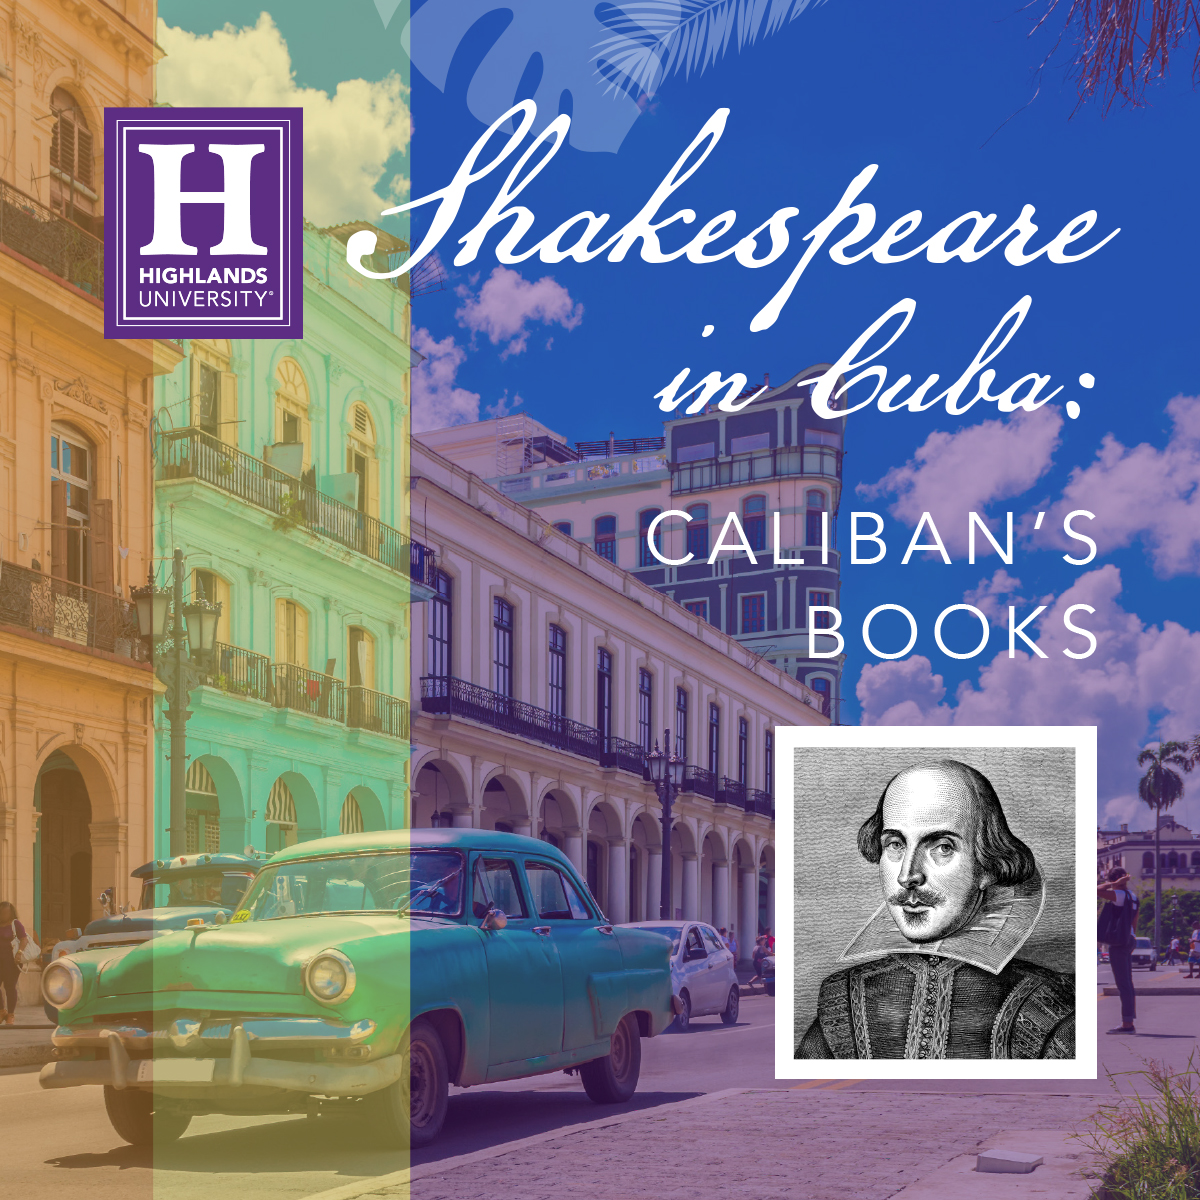 photo of Shakespeare in Cuba book cover